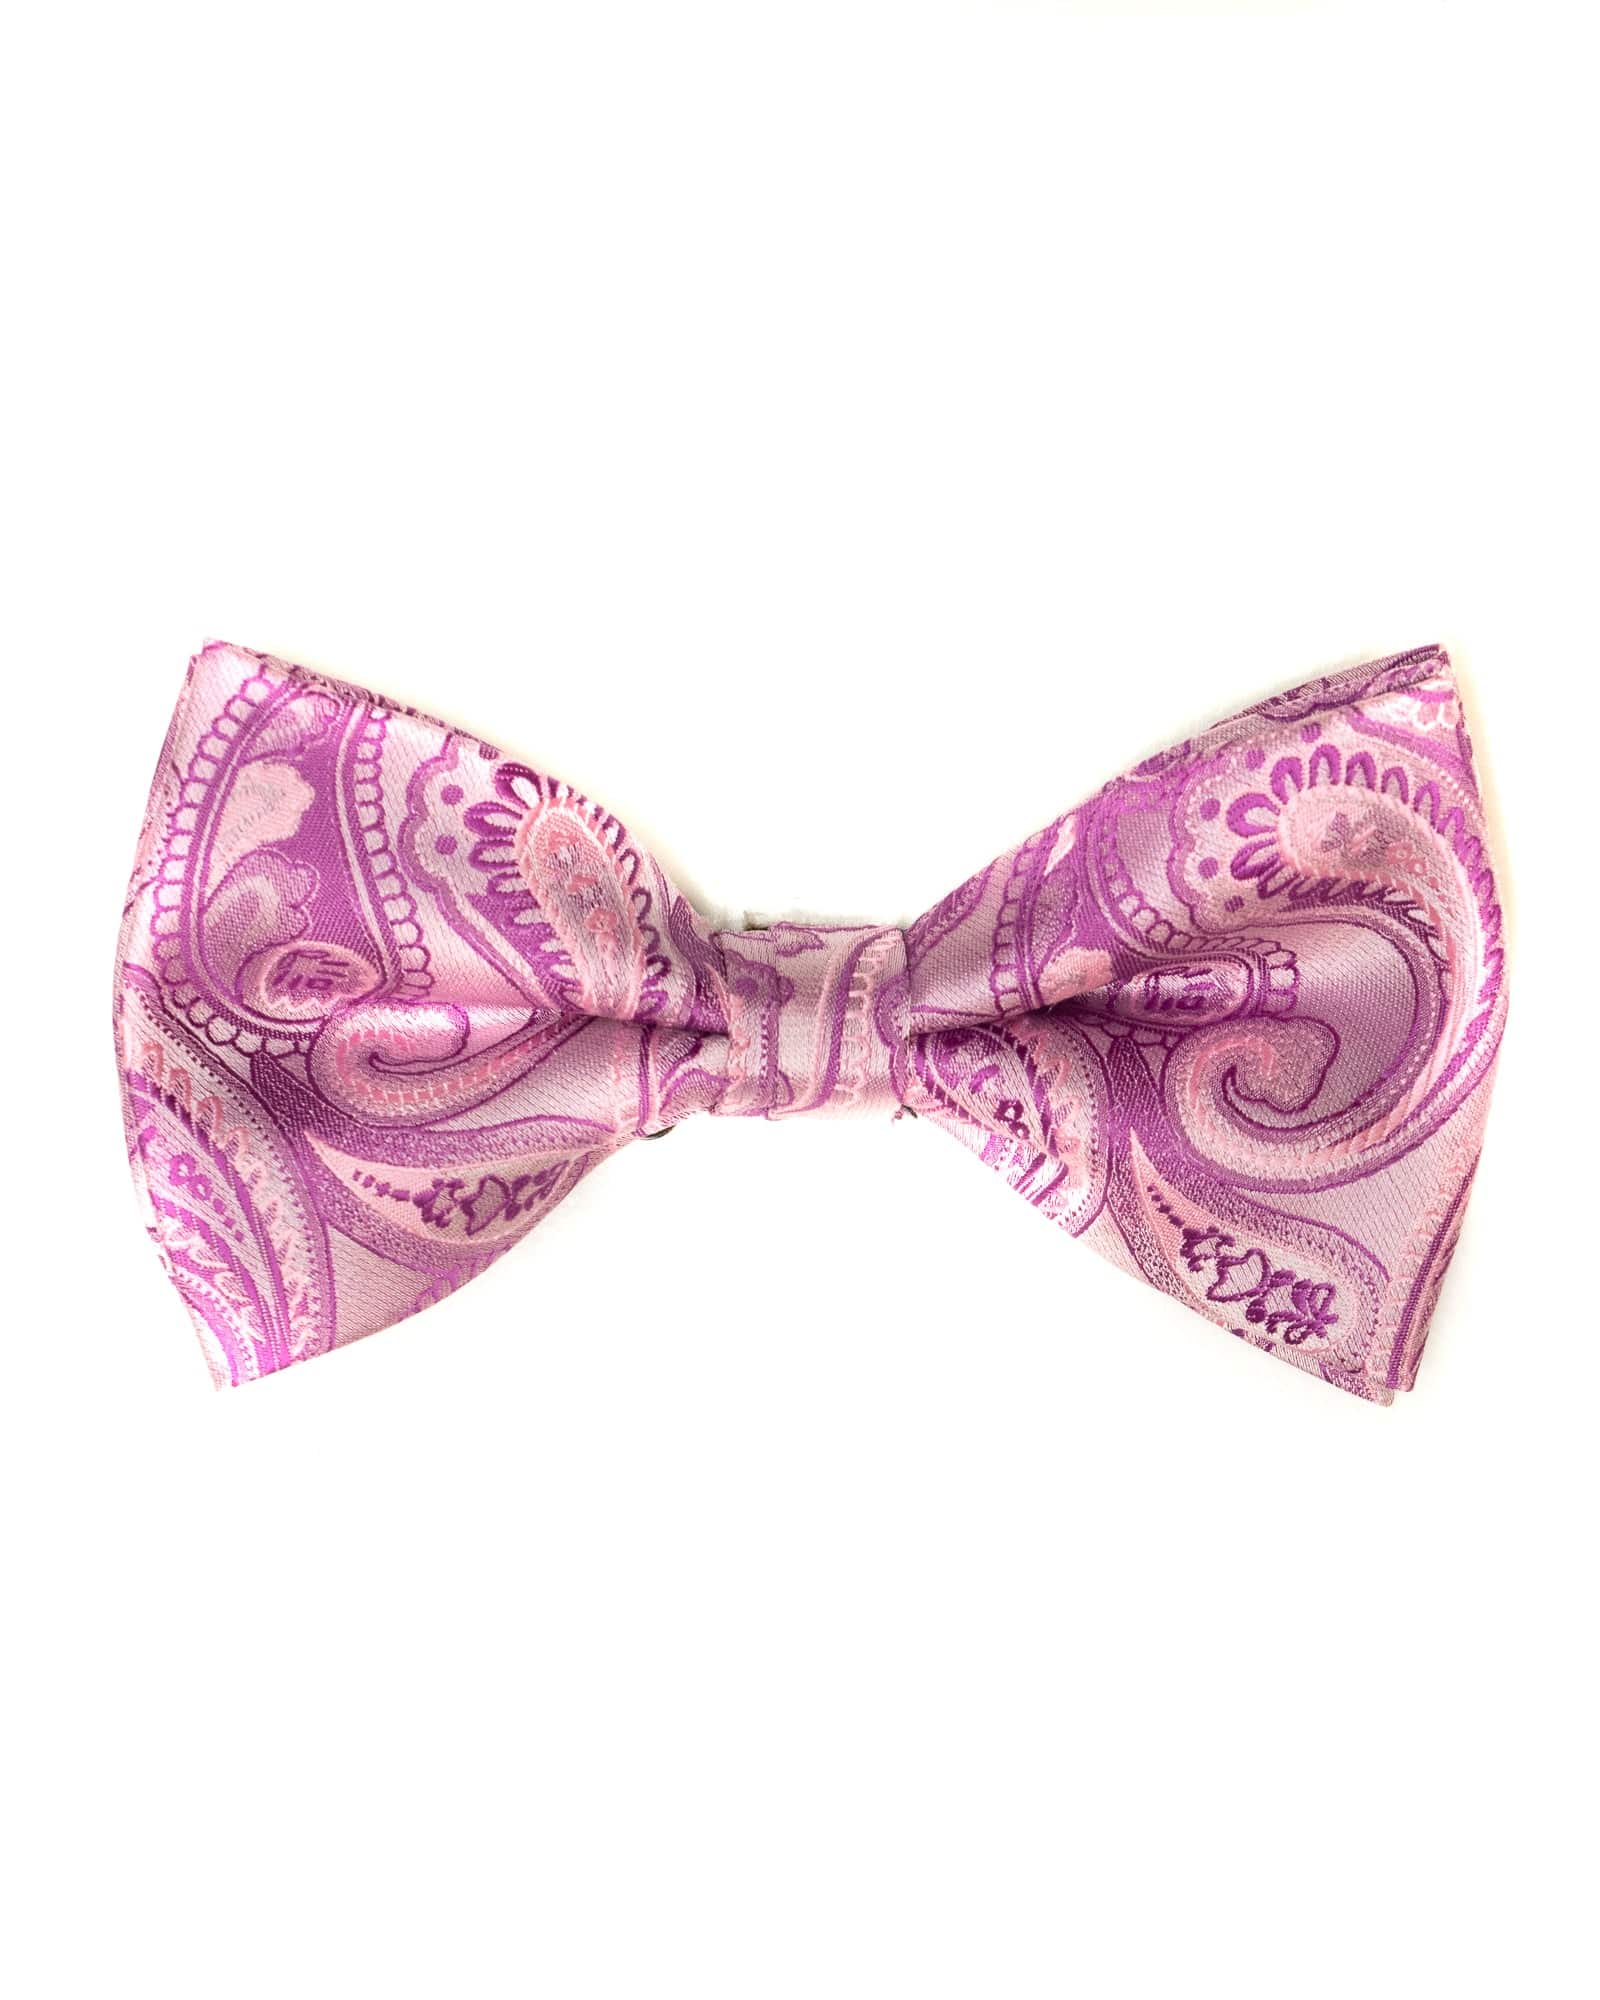 Bow Tie Paisley In Pink & Light Pink - Rainwater's Men's Clothing and Tuxedo Rental